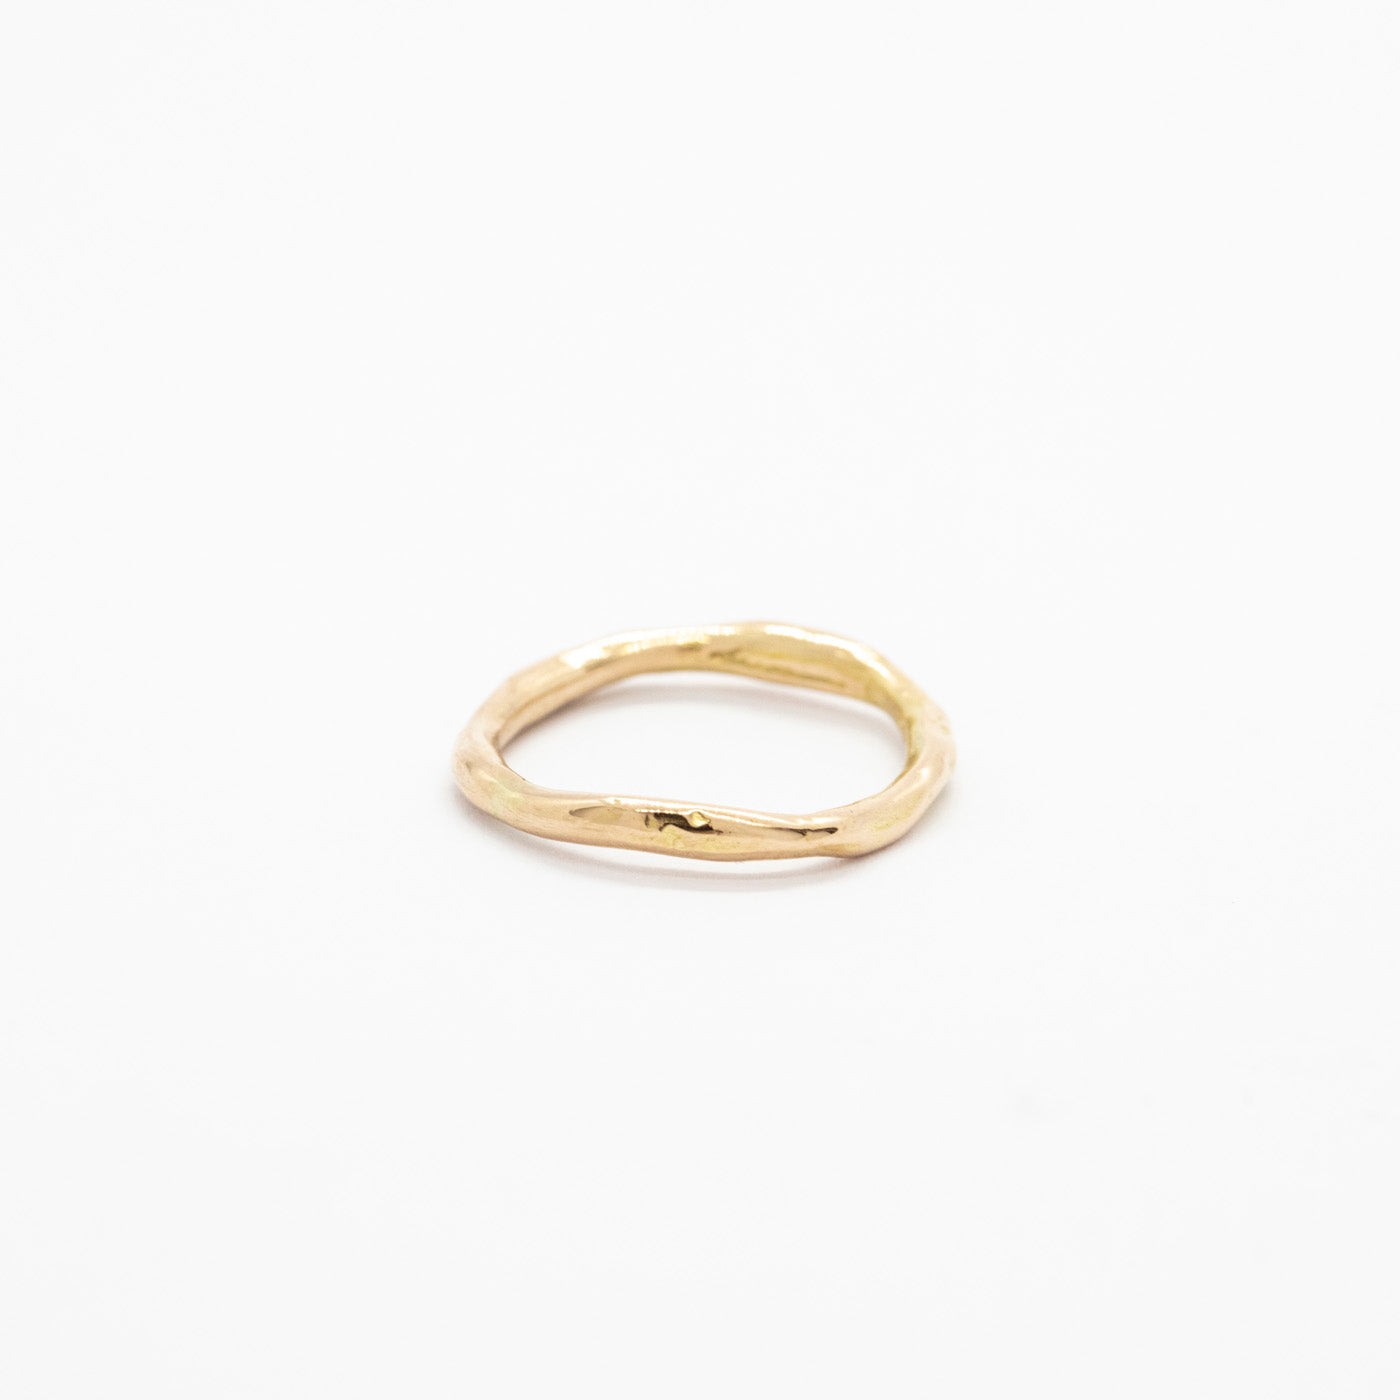 Ring Erato Wedding Band for Her 14ct or 18ct rose gold product view innan jewellery independent atelier berlin